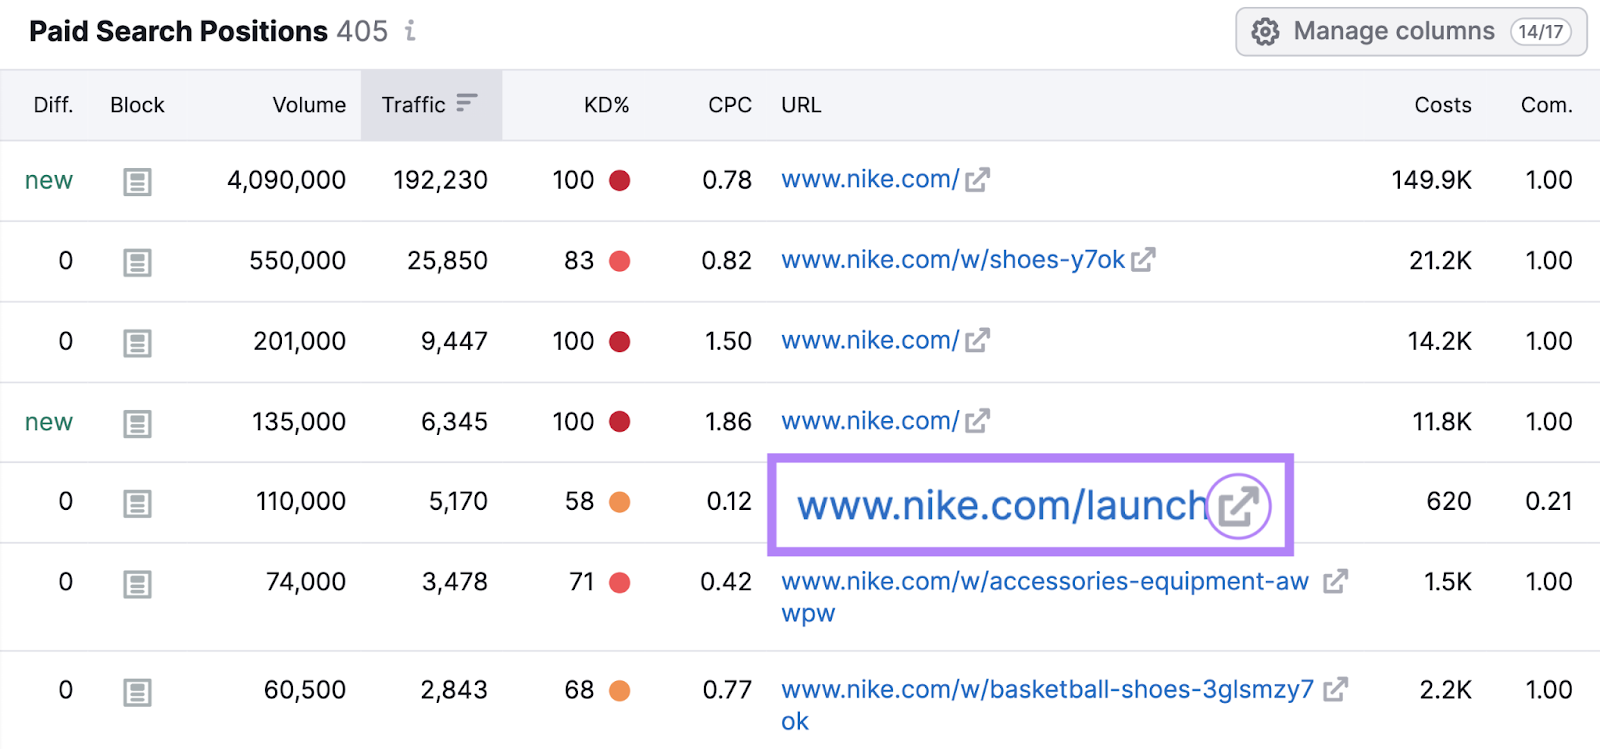 "www.nike.com/launch" effect   highlighted